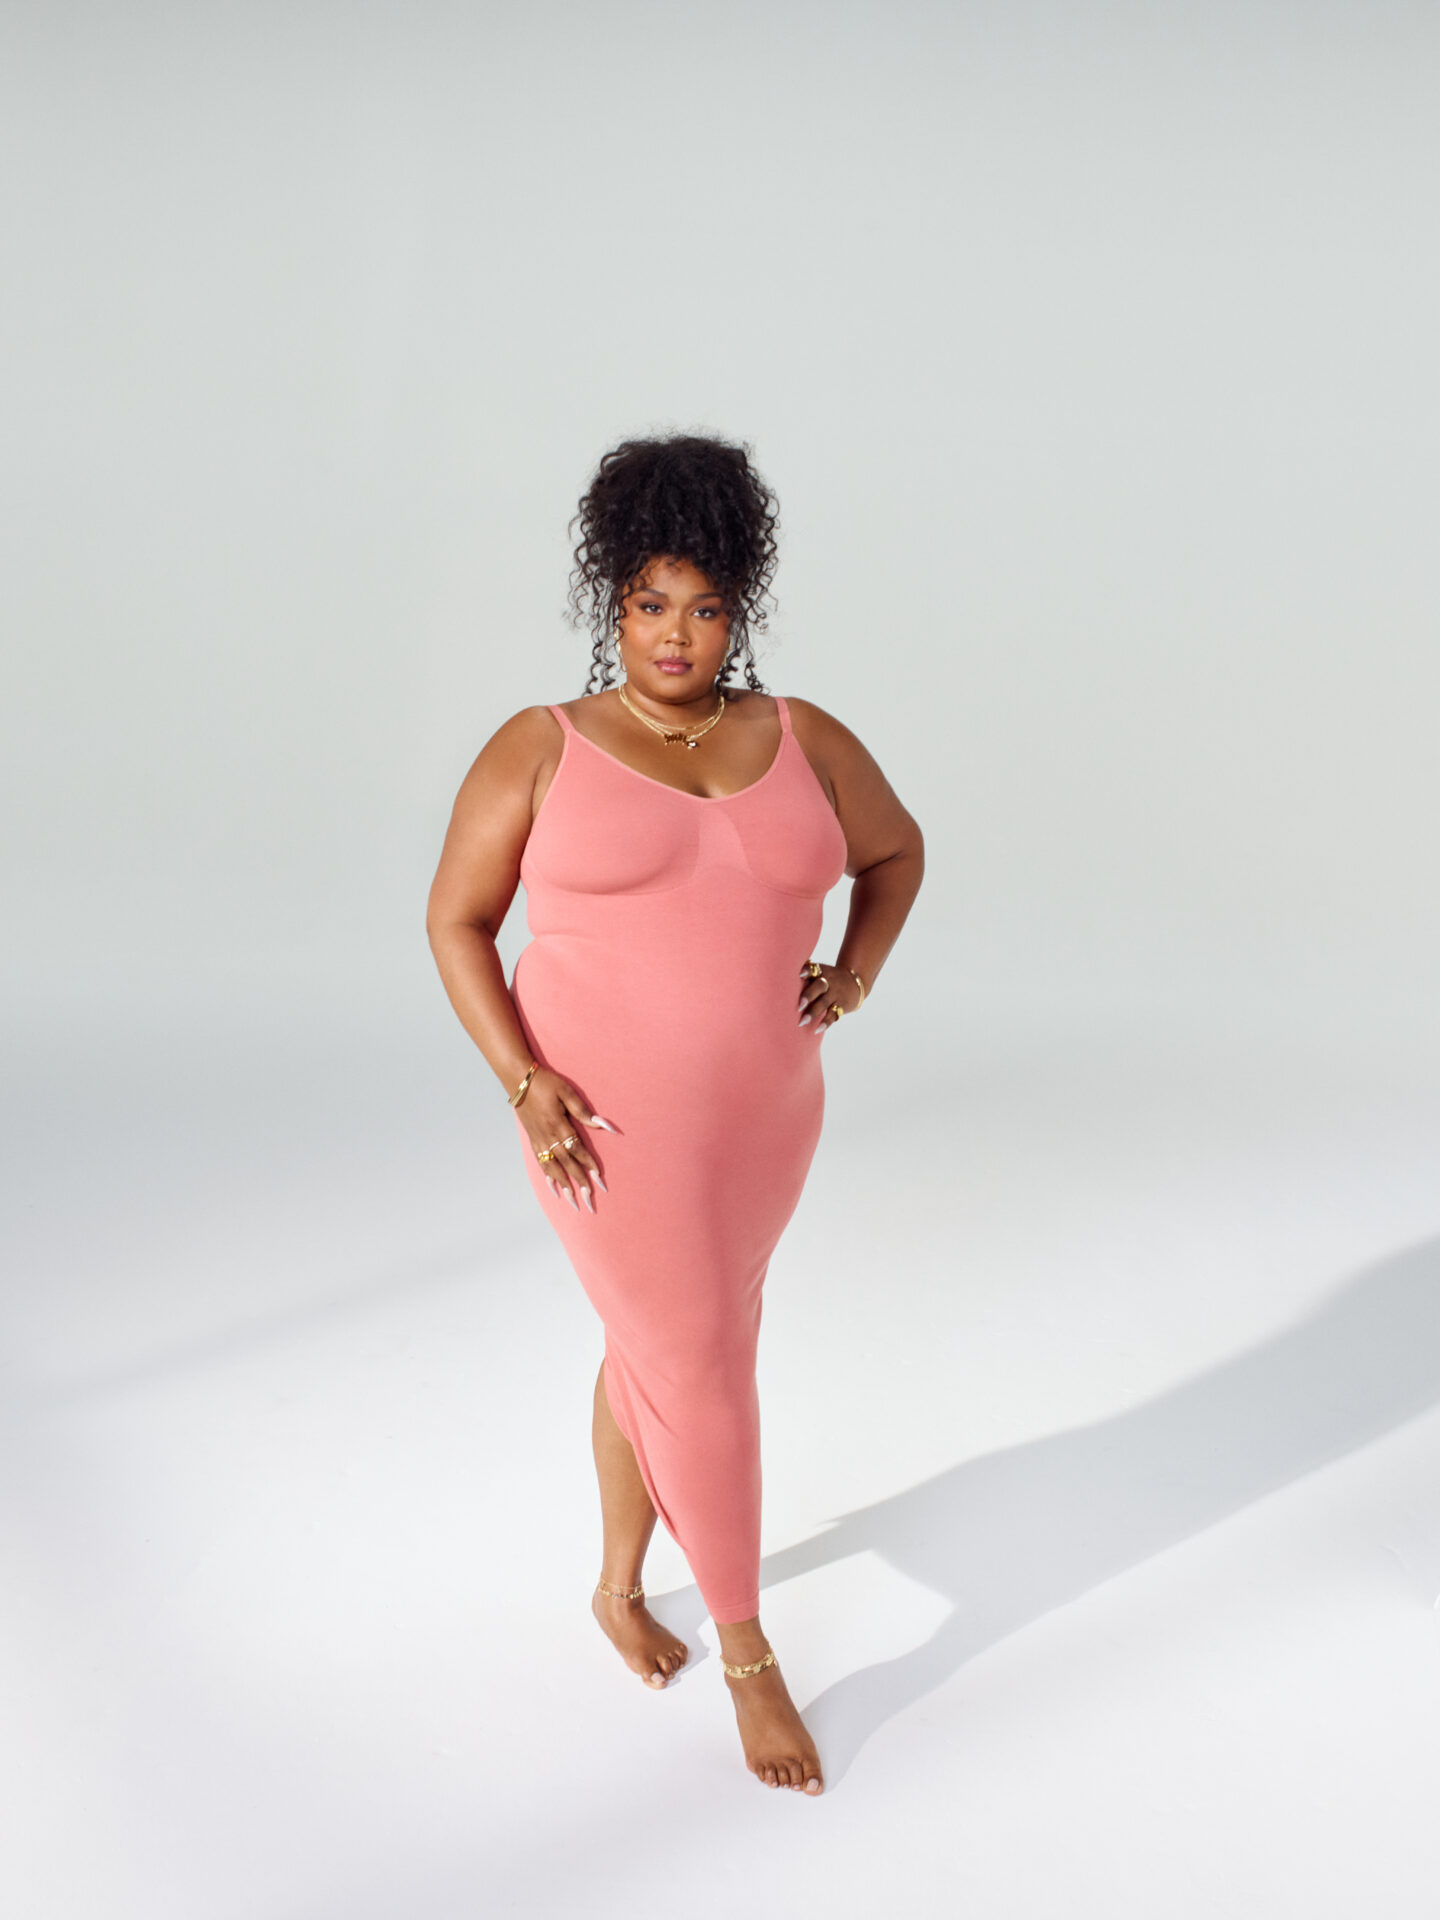 YITTY Smoothing Denim Collection Featuring Lizzo. - OTSMAGAZINE